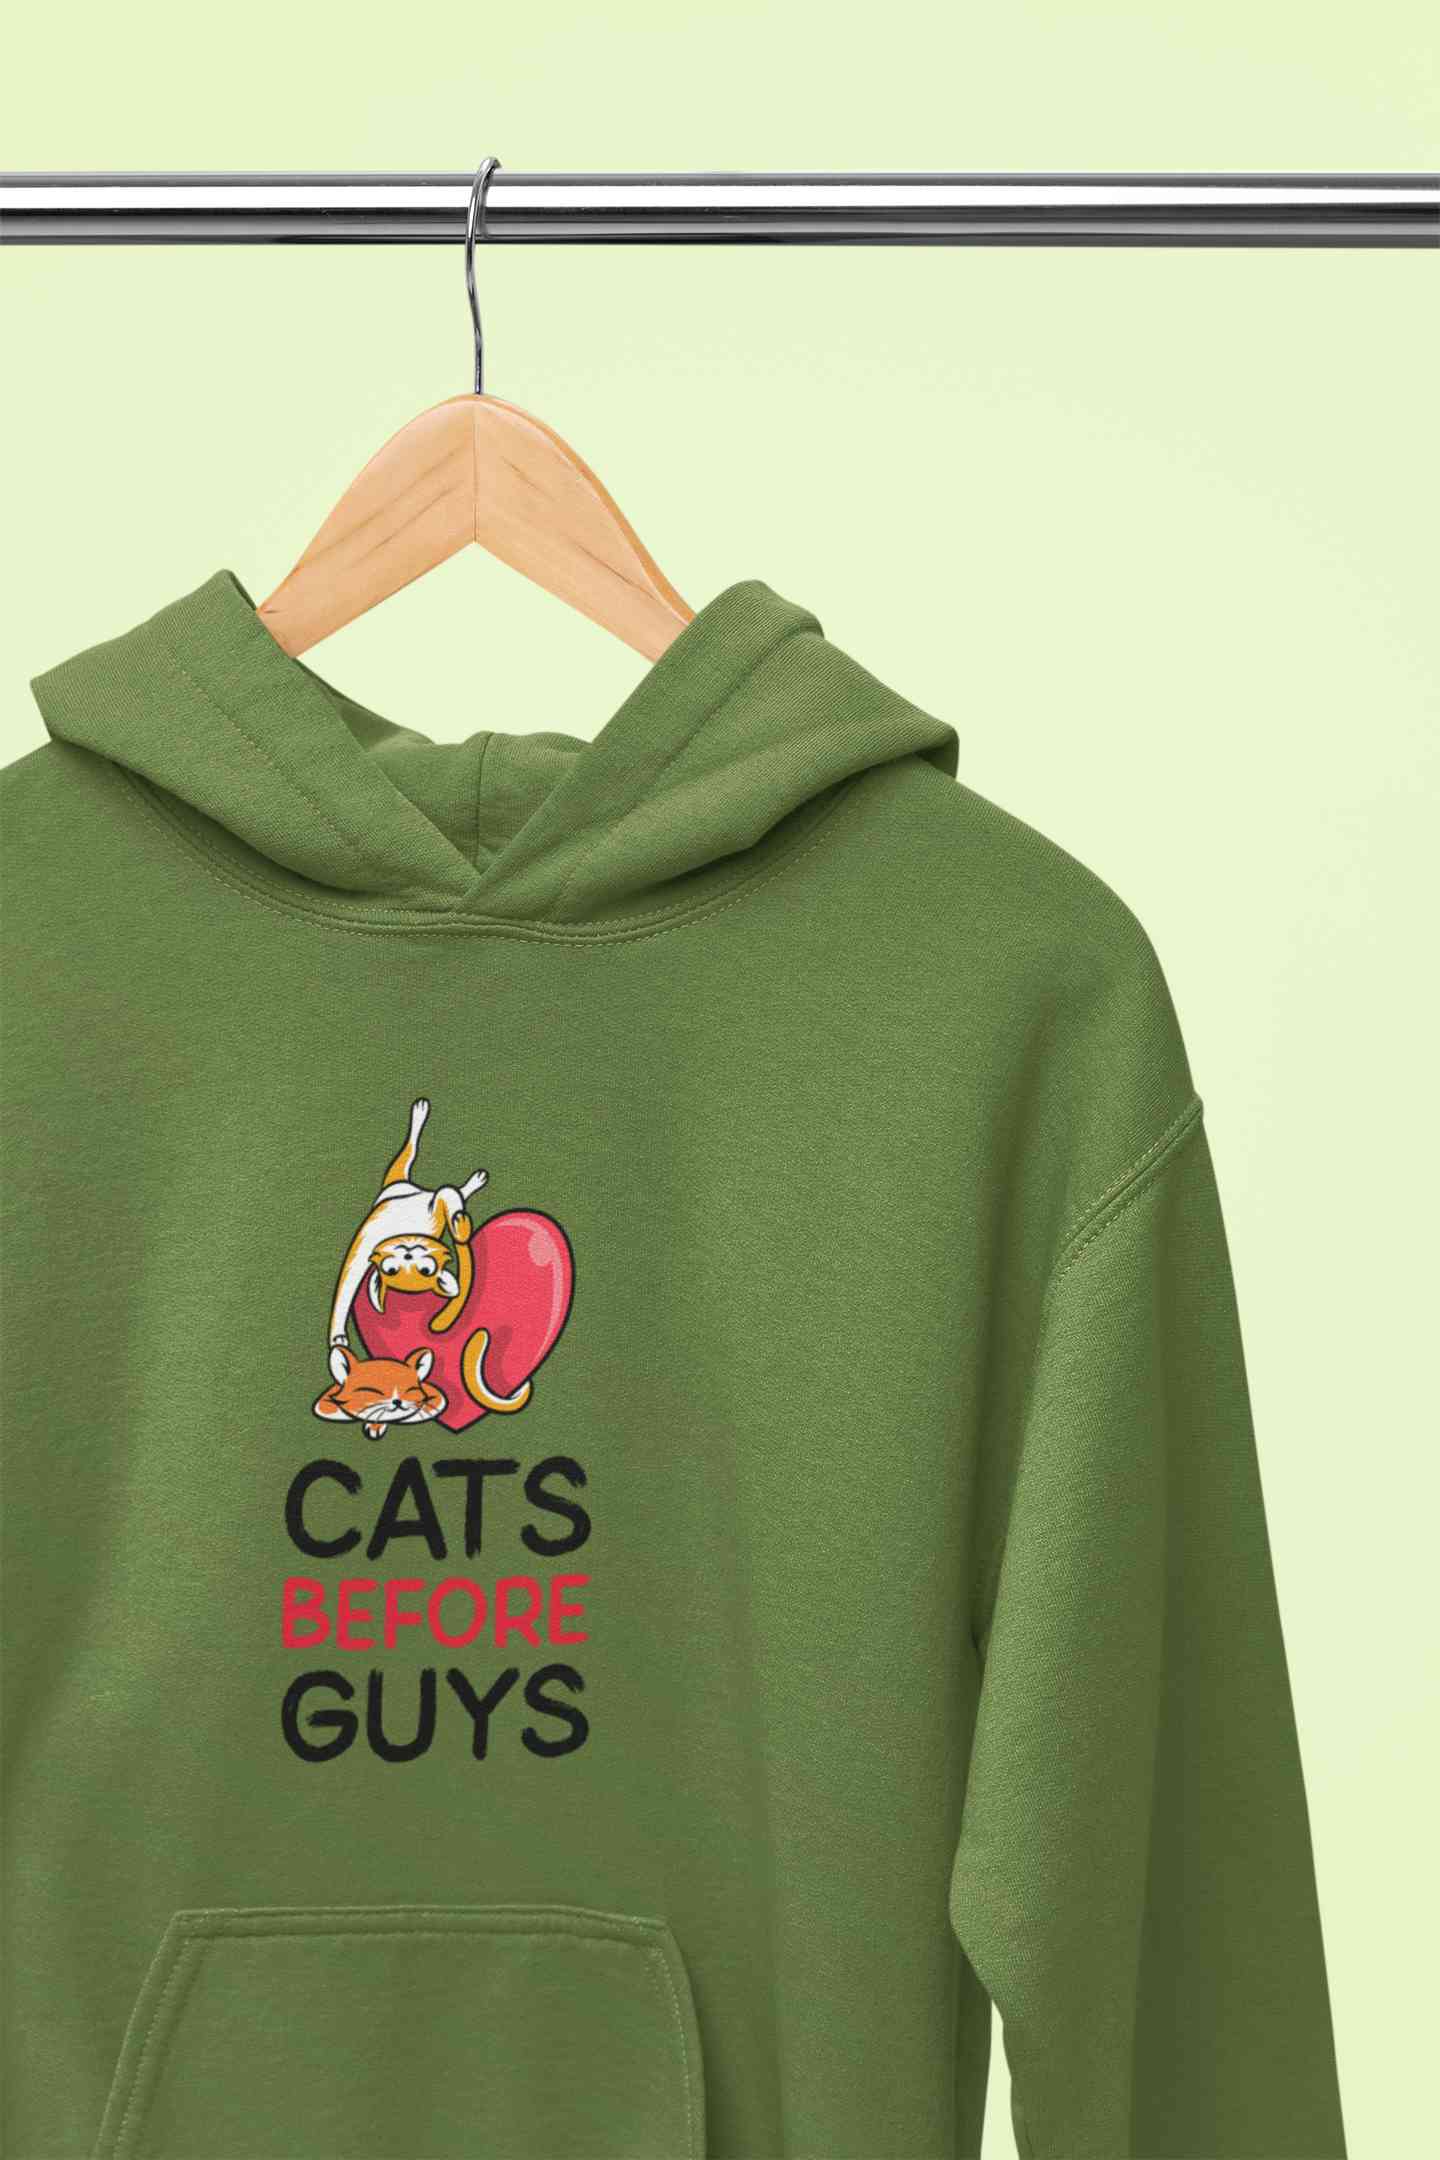 Cats Before Guys Quotes Graphics Hoodies for Women-FunkyTeesClub